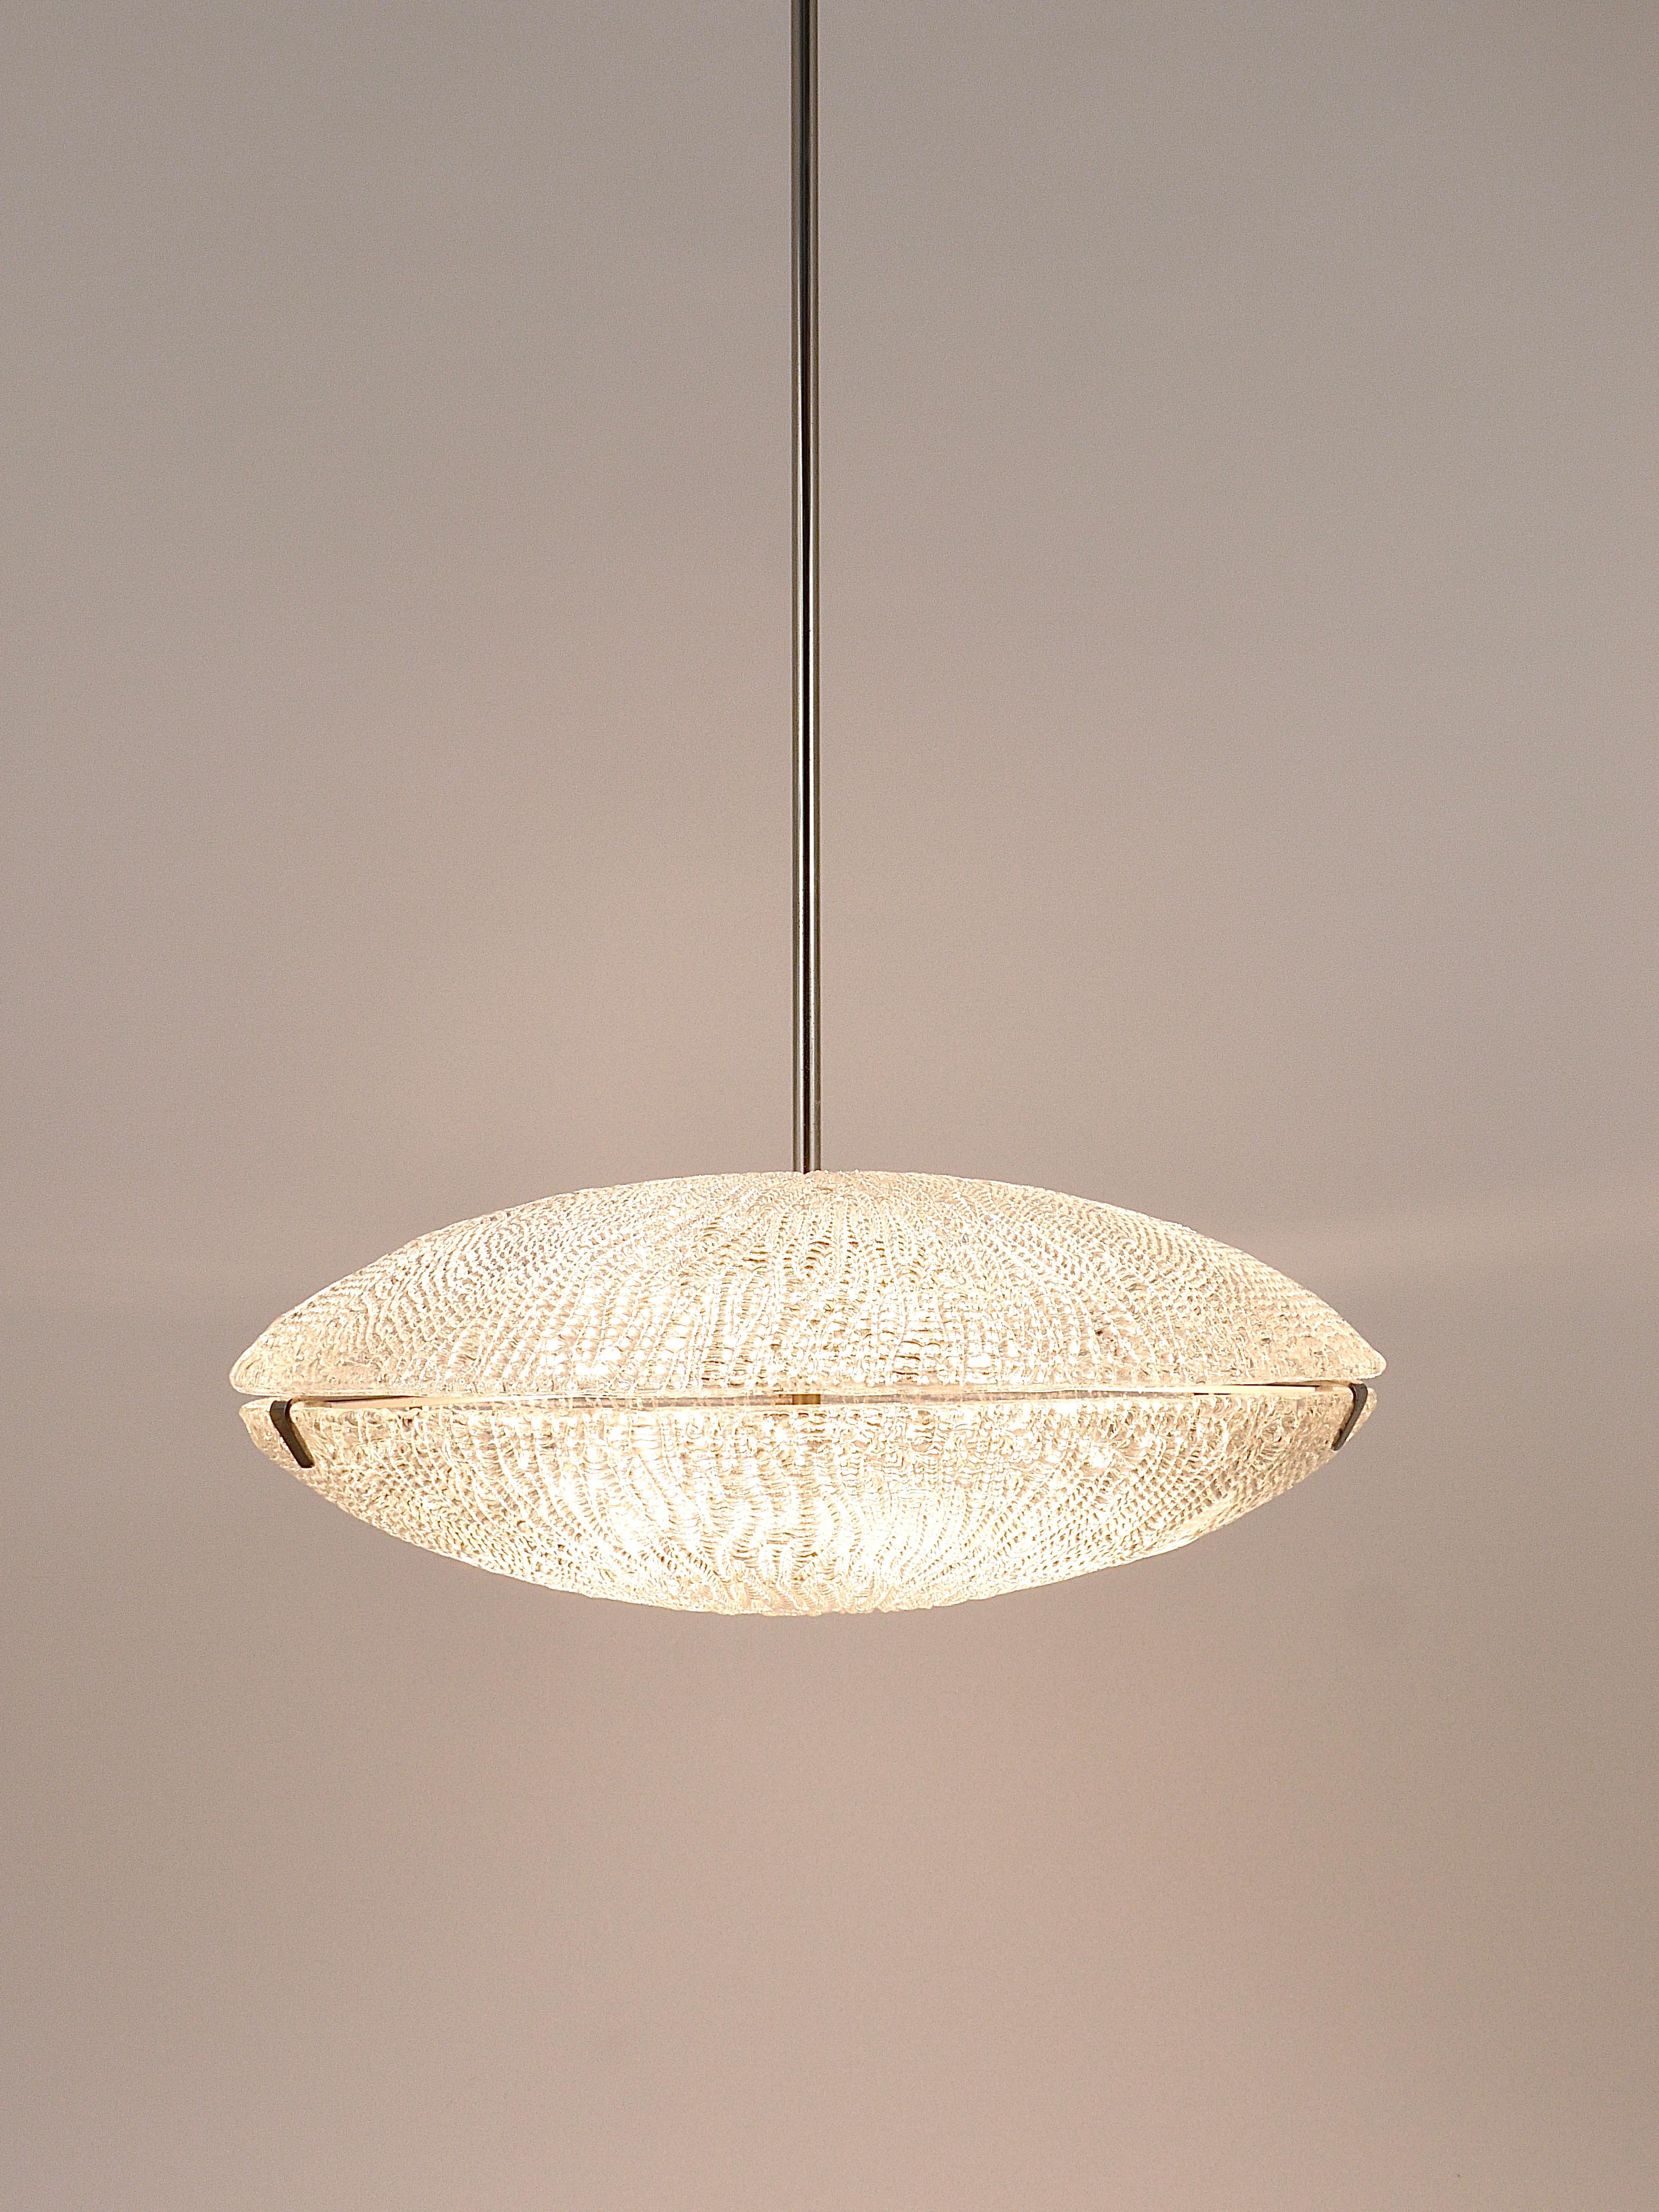 A minimalistic midcentury Discus chandelier from the 1950s. Manufactured by J.T. Kalmar, Vienna, Austria. This beautiful chandelier consists of two large textured melting ice glass discs / bowls (diameter 19 1/2“) on a nickel-plated brass hardware.